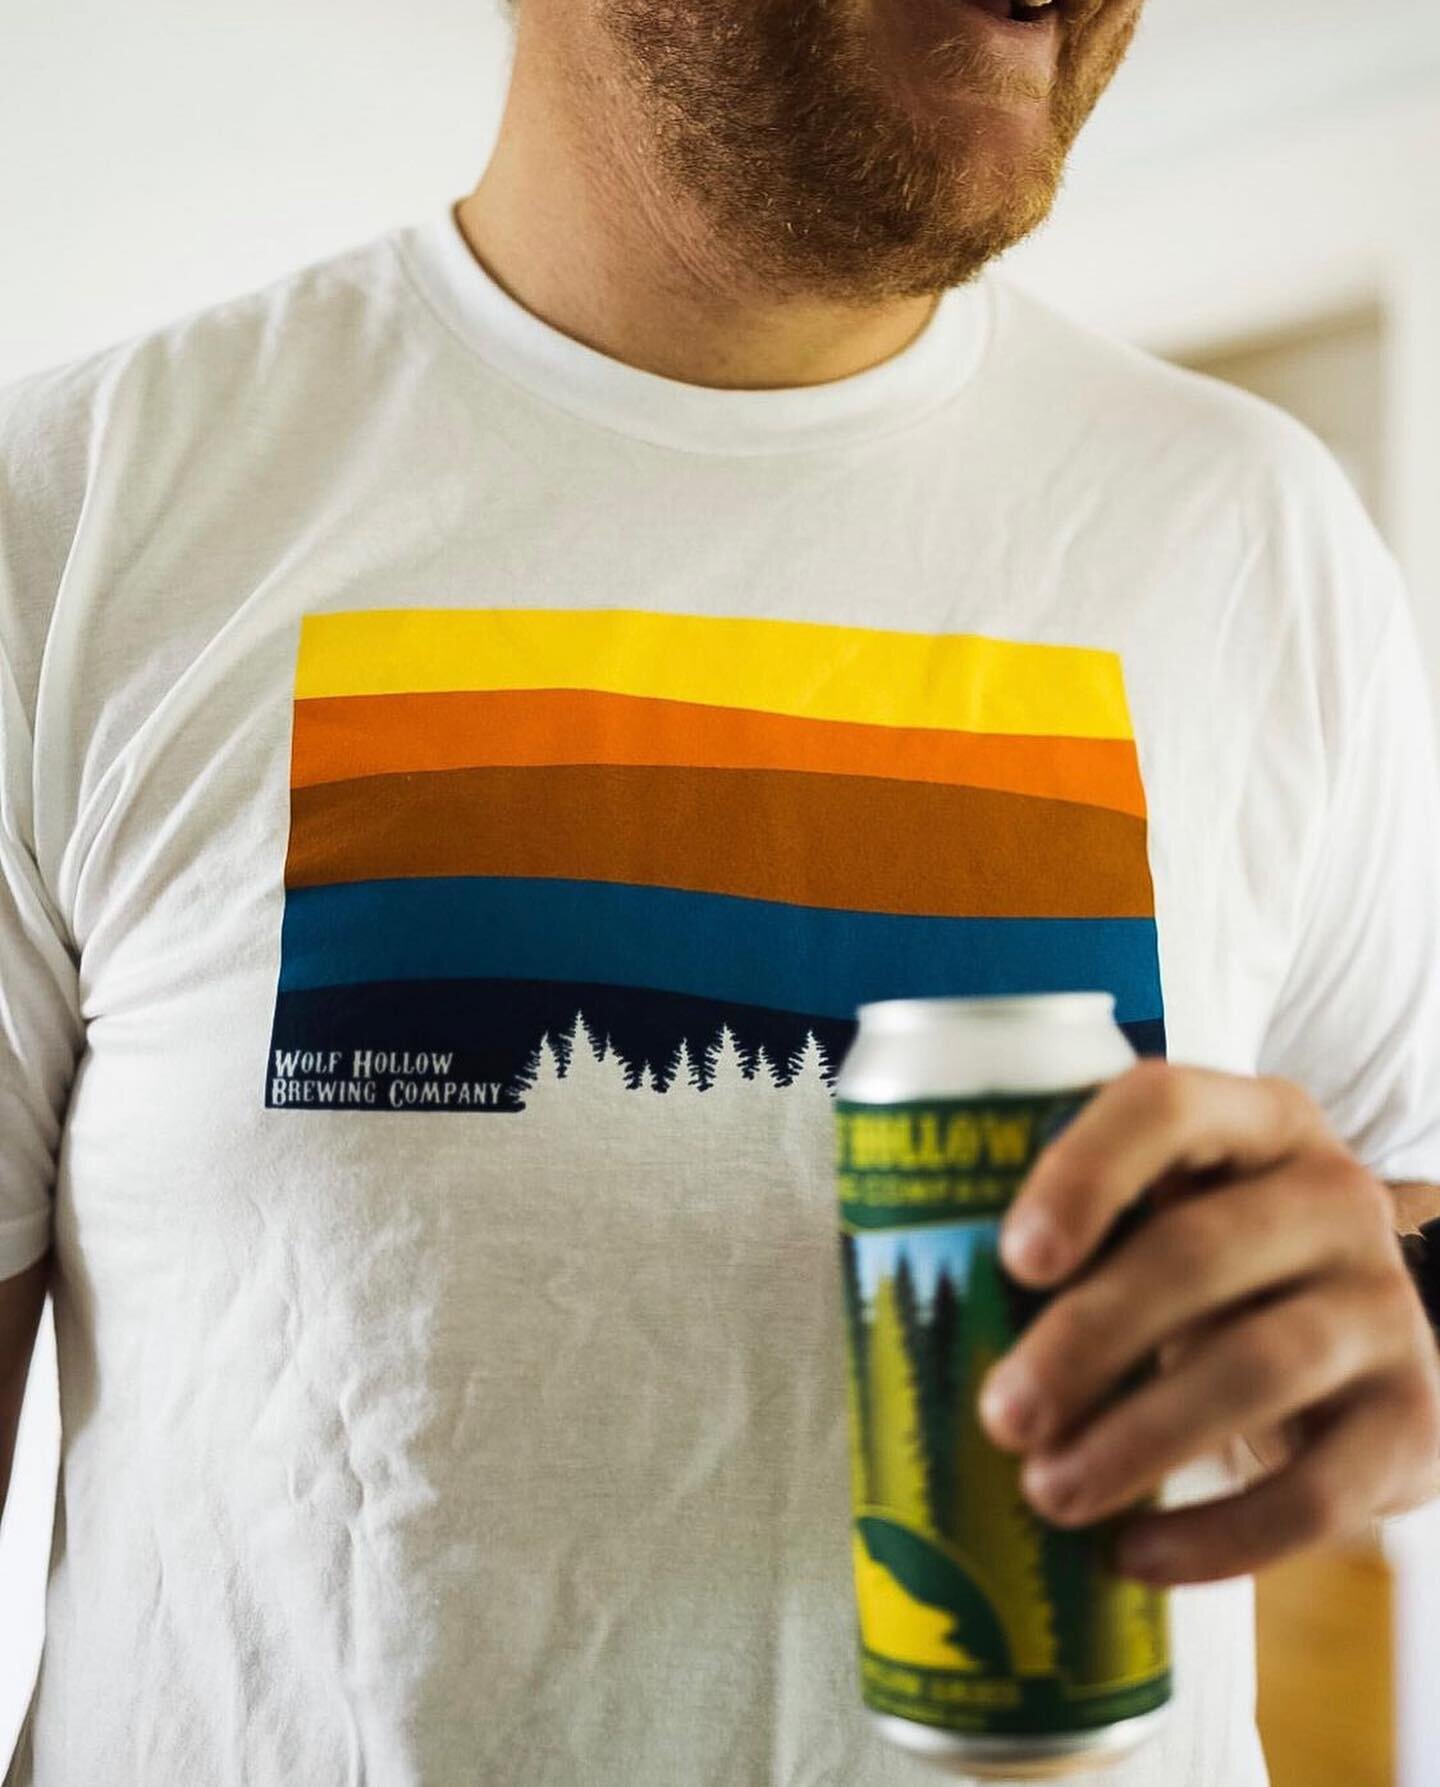 This tee has all the upstate summer feels. Paired perfectly with a patio pint on one of the best outdoor spaces in the 518. @wolfhollowbrewingco ps : Have you seen their NEW pavilion? 👀 📸 @con_brad